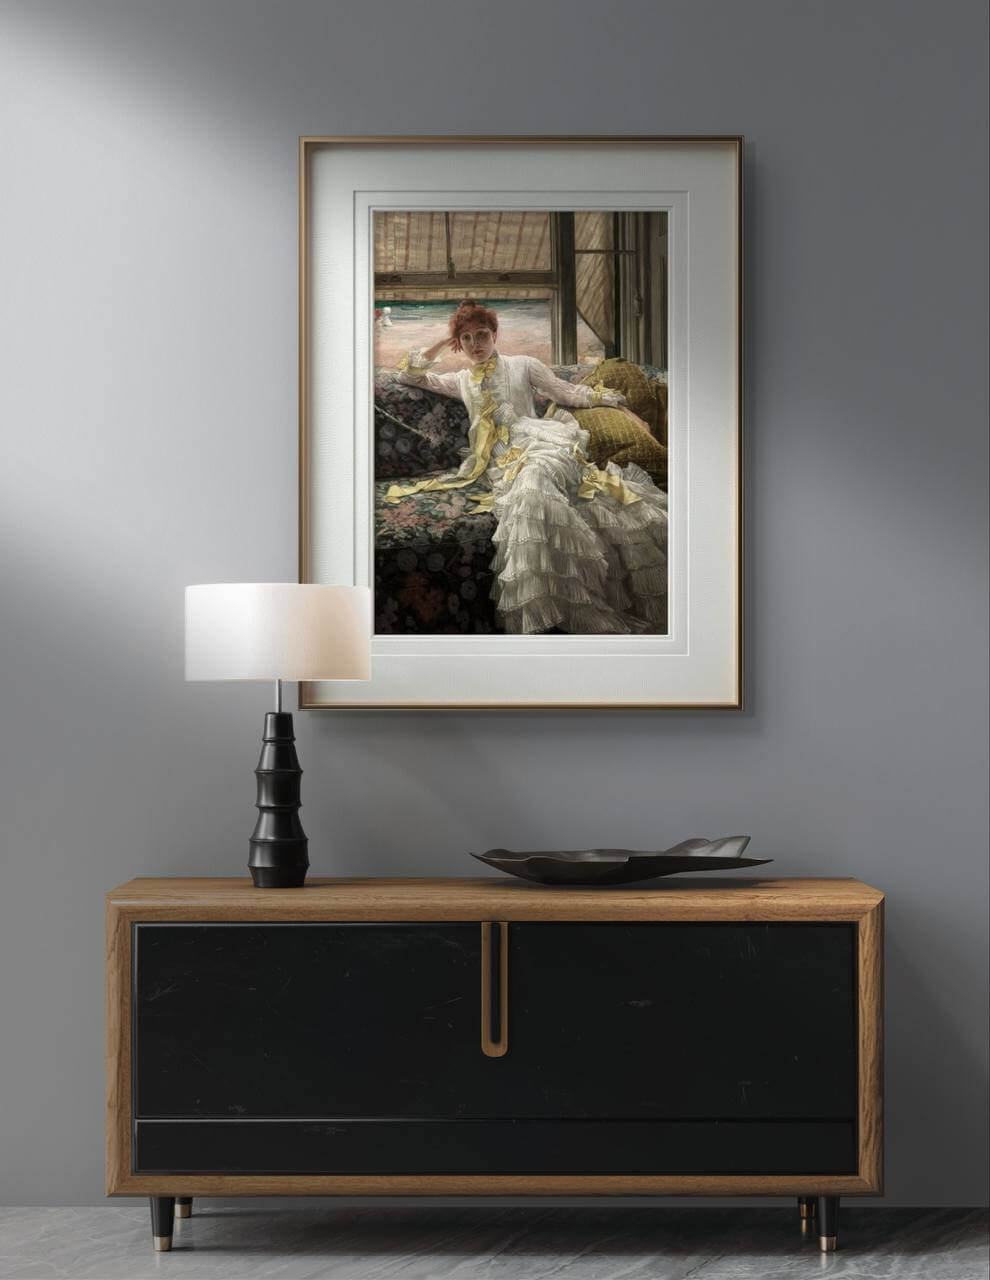 A modern interior setting with a wooden console table, a black table lamp, and a framed poster of "Seaside, July" by James Tissot hanging above. The wall art adds a sophisticated touch to the room, ideal for home decor and enhancing any living space with classic Victorian art.